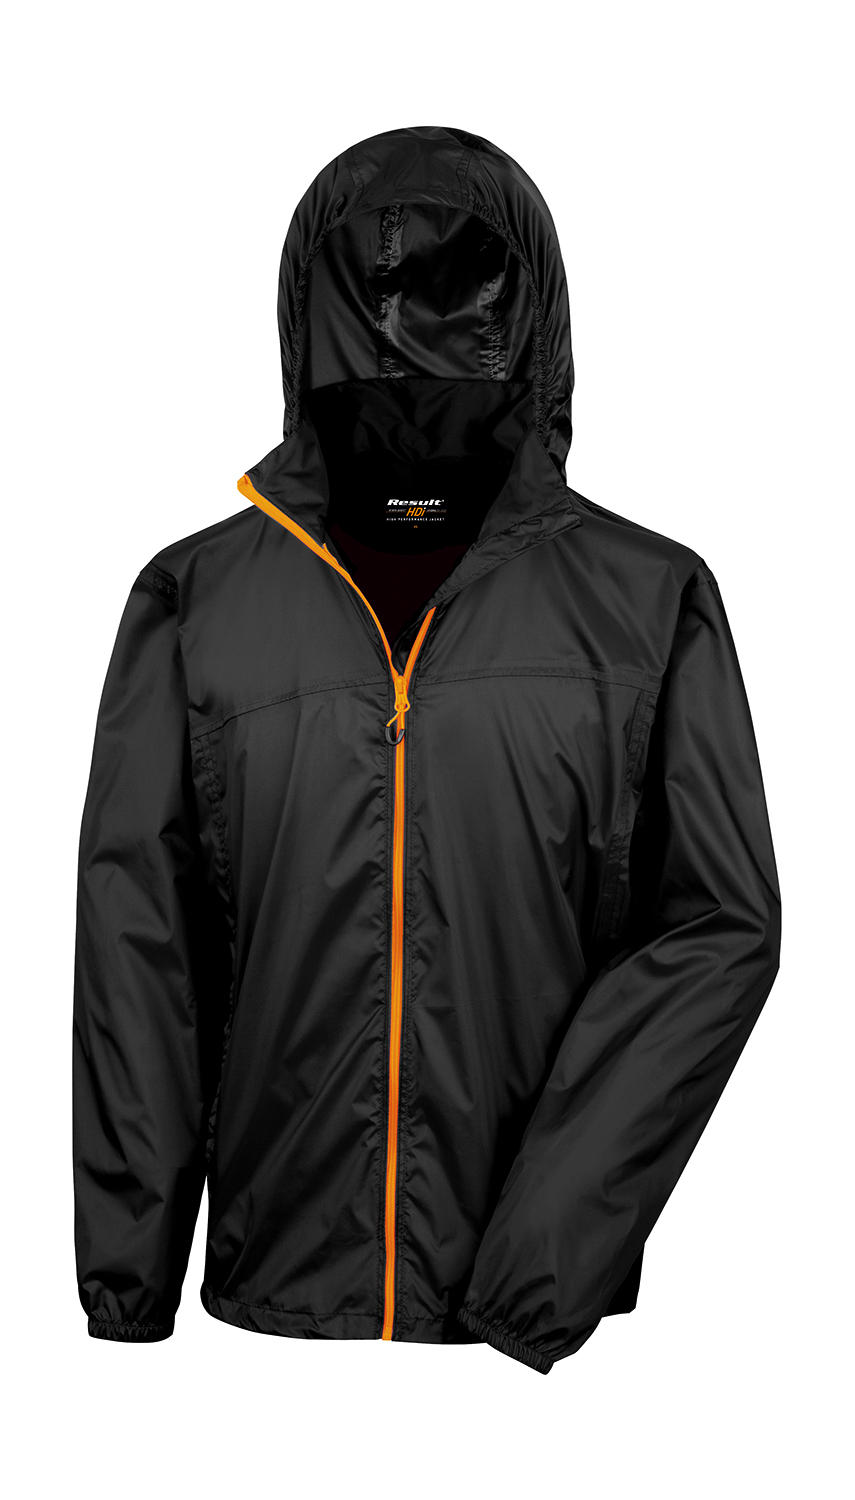  HDI Quest Lightweight Stowable Jacket in Farbe Black/Orange